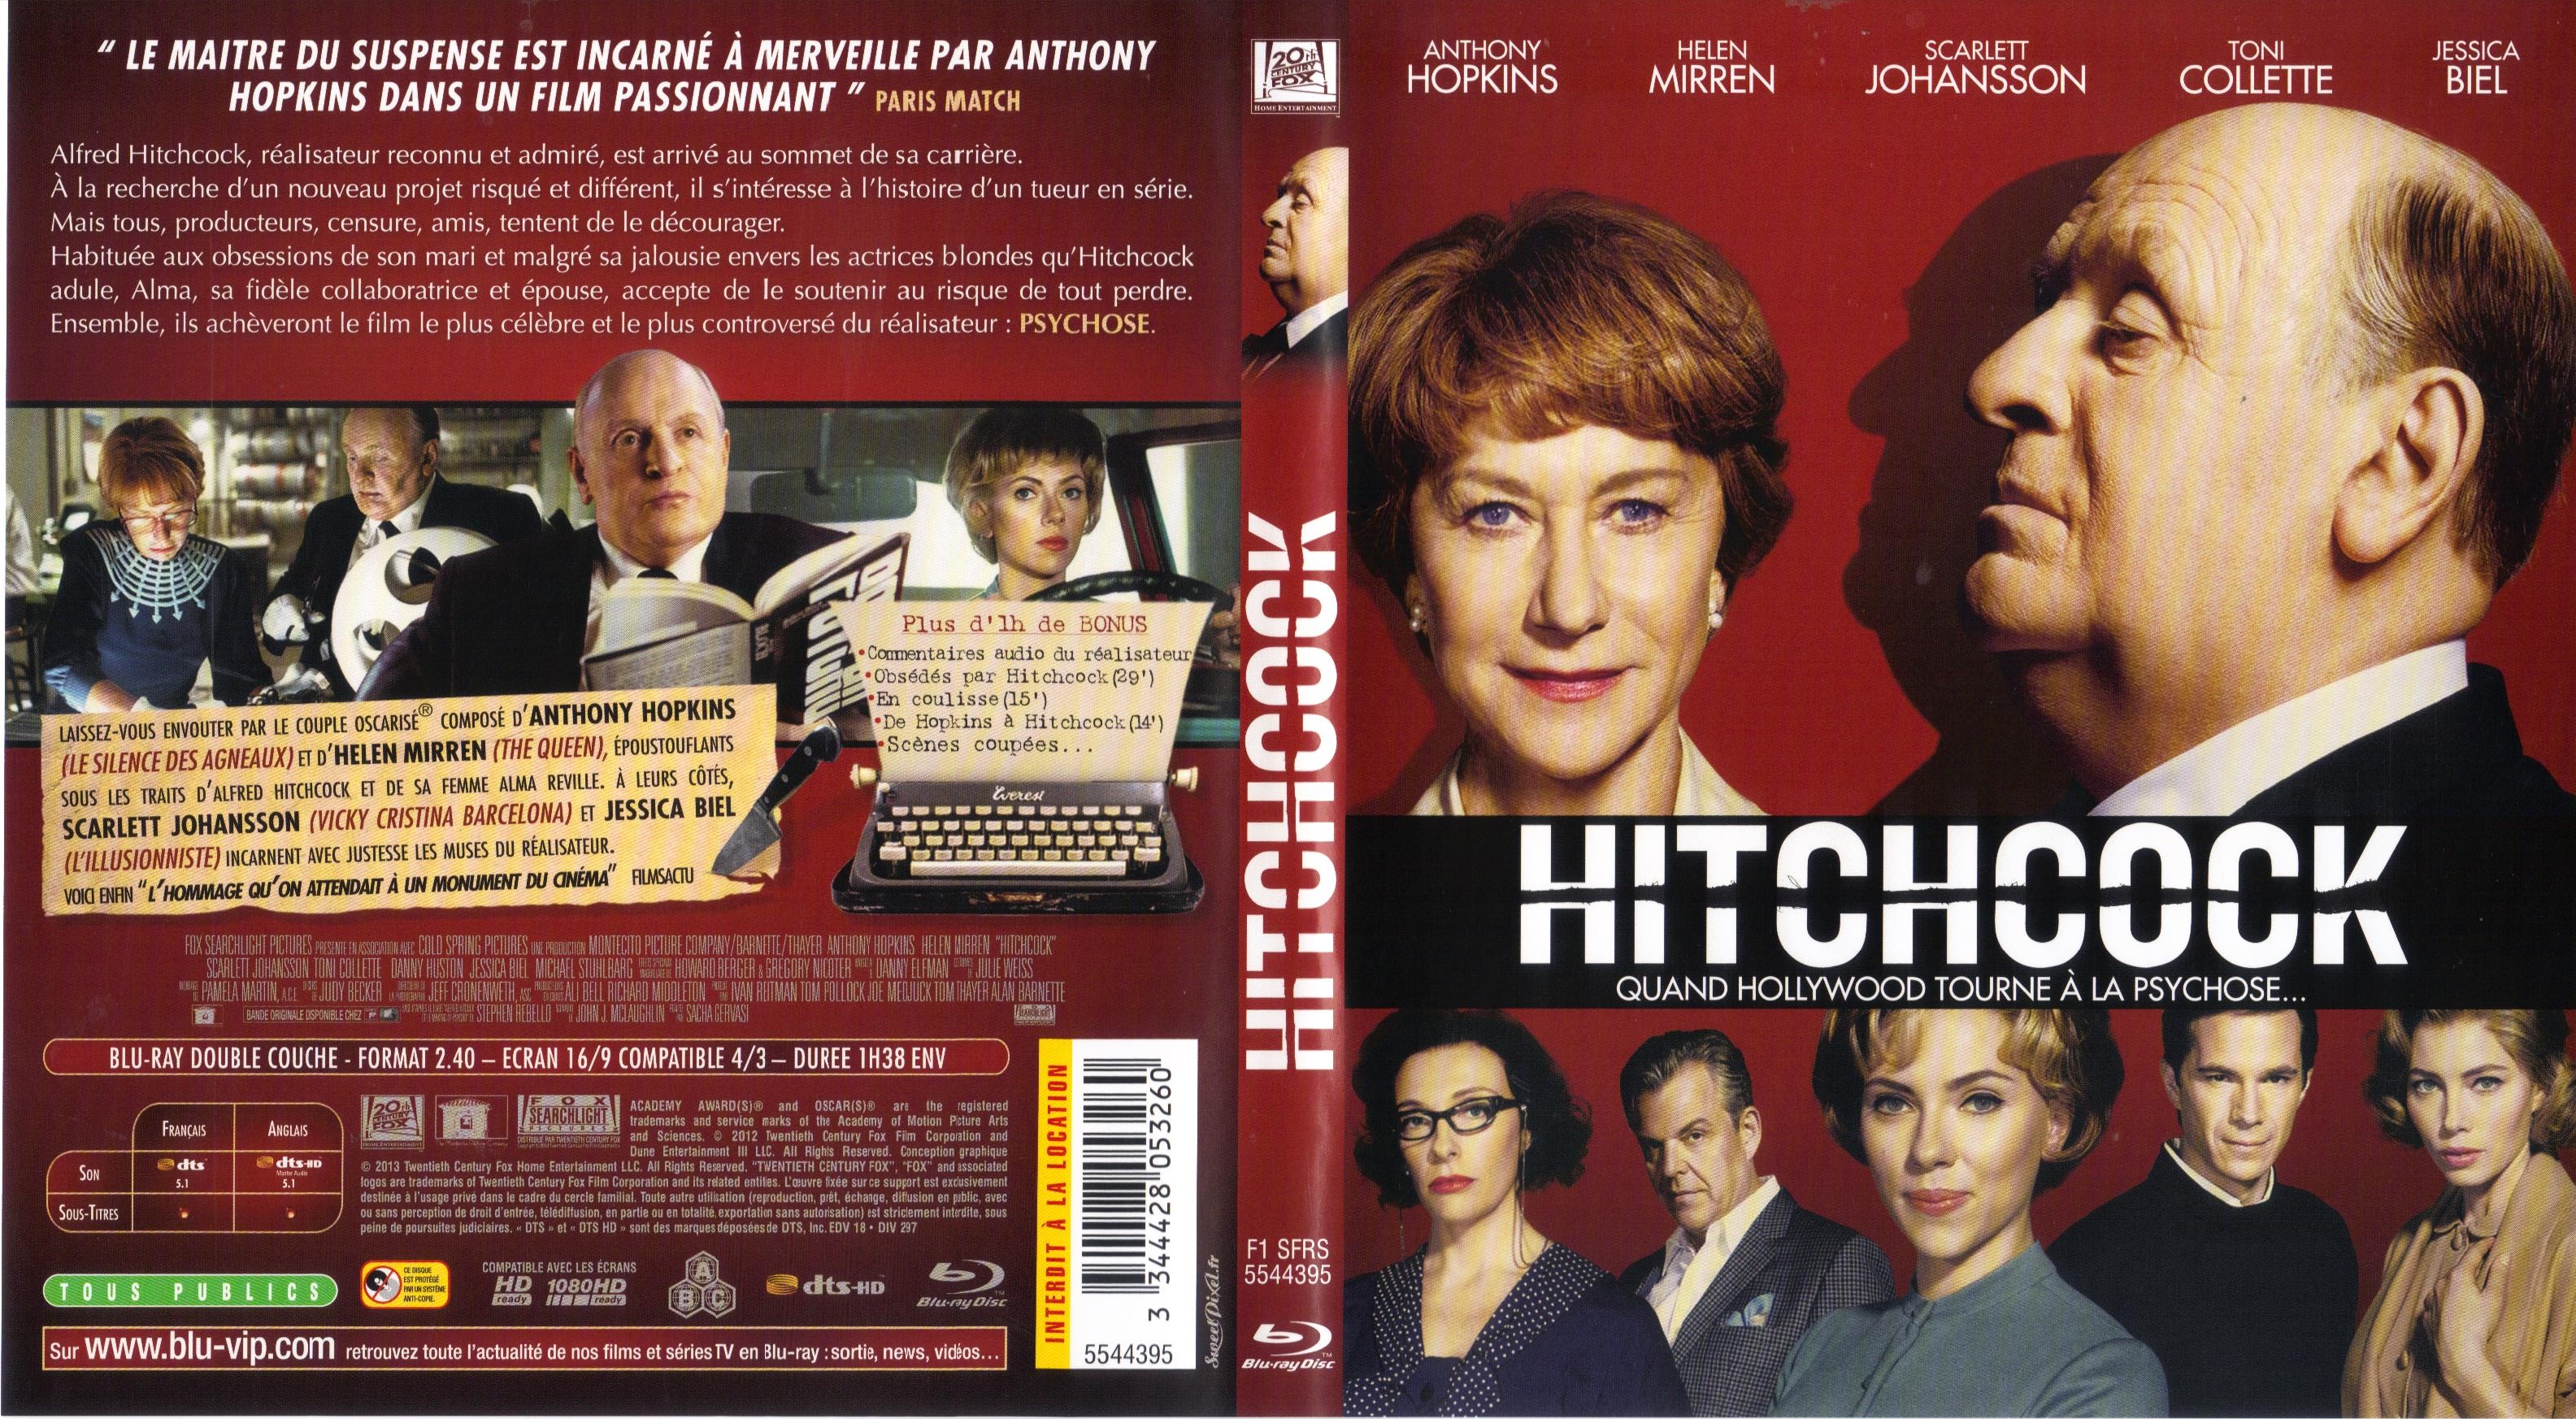 Jaquette DVD Hitchcock (BLU-RAY)